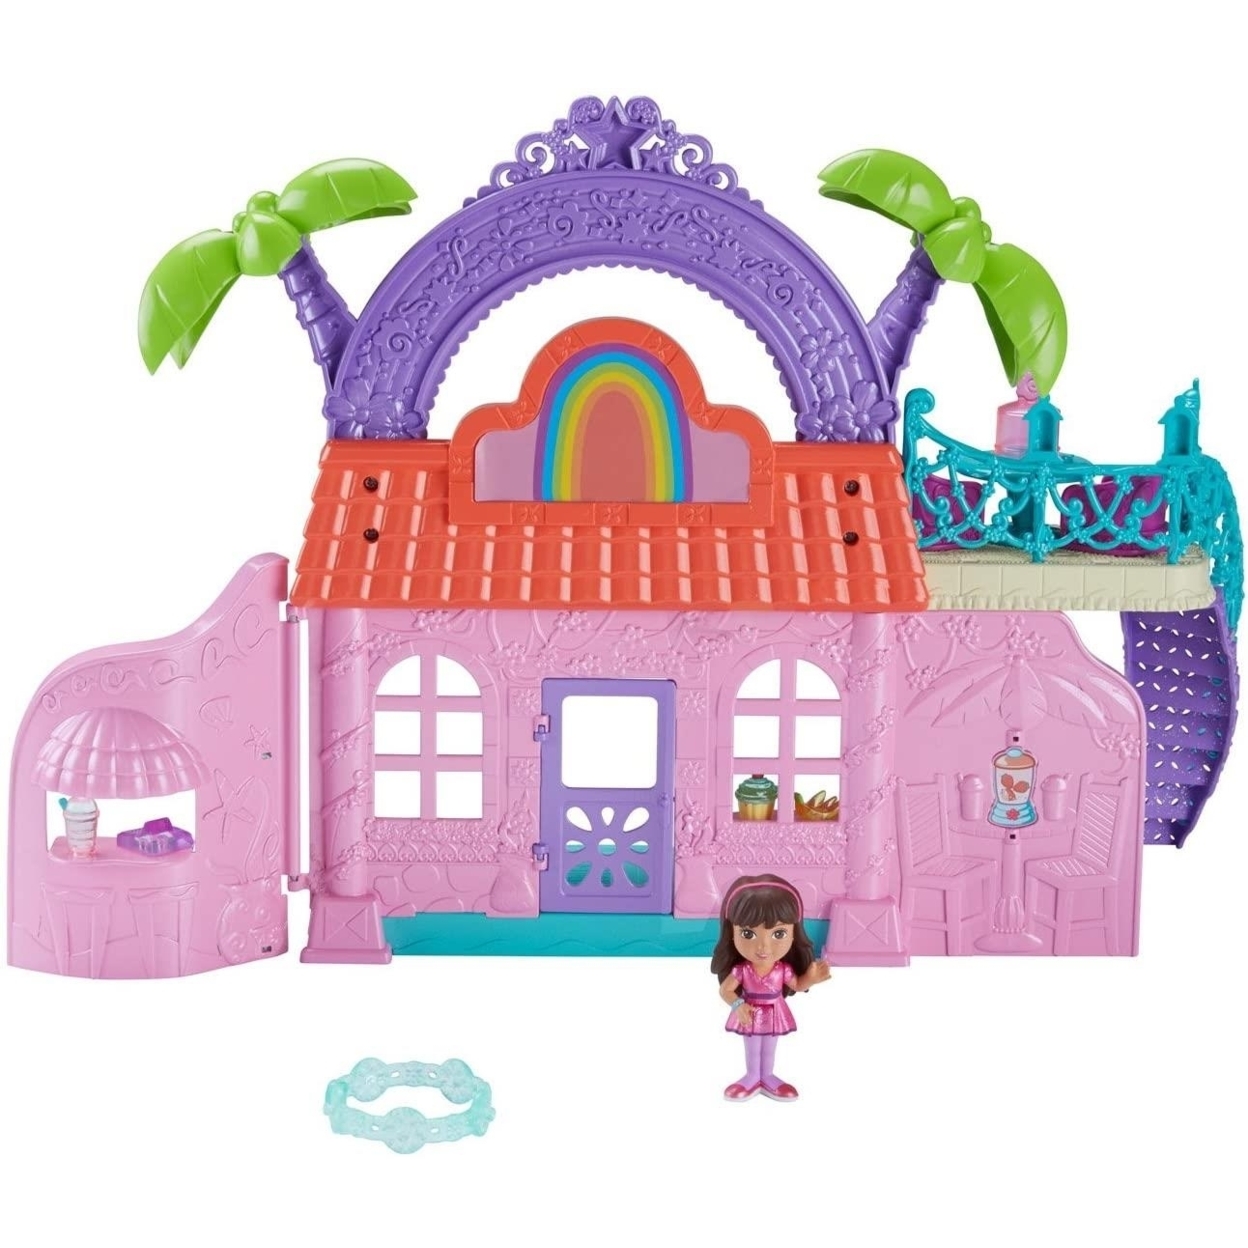 Fisher-Price Dora and Friends Cafe - image 4 of 5